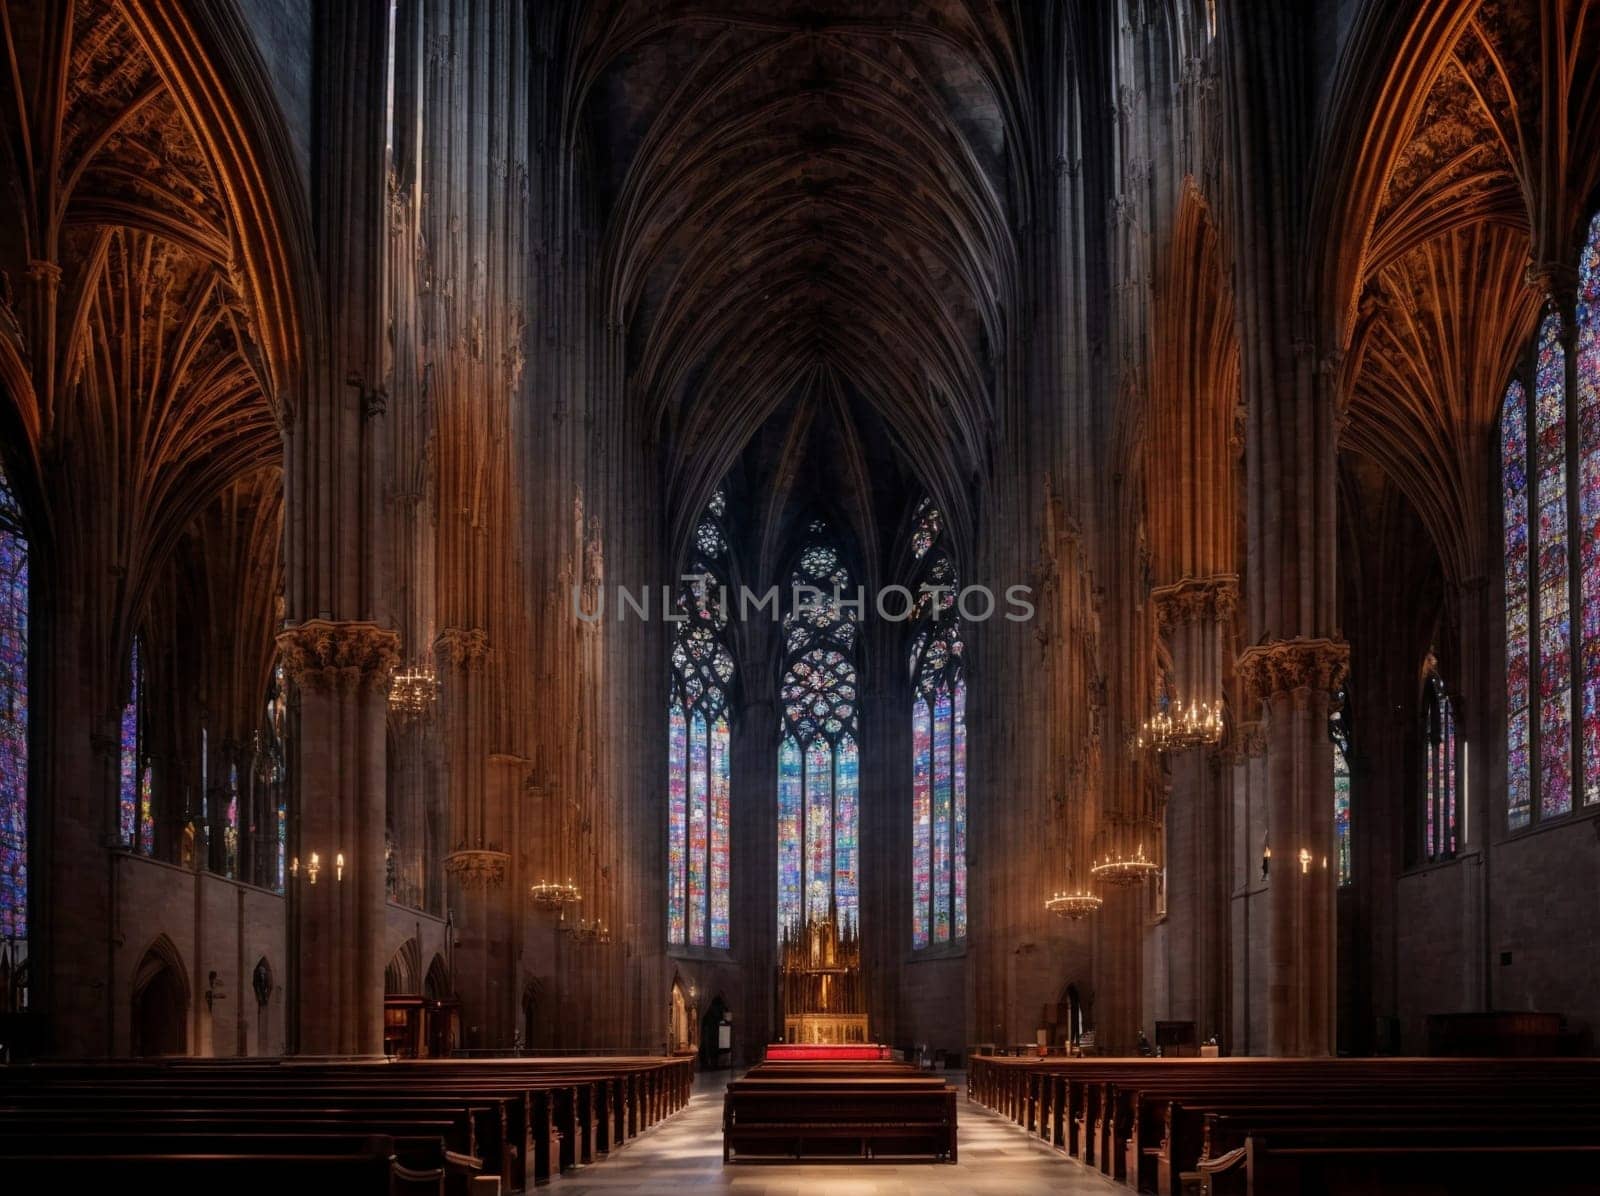 Experience the grandeur of a magnificent cathedral adorned with beautiful stained glass windows and rows of pews.